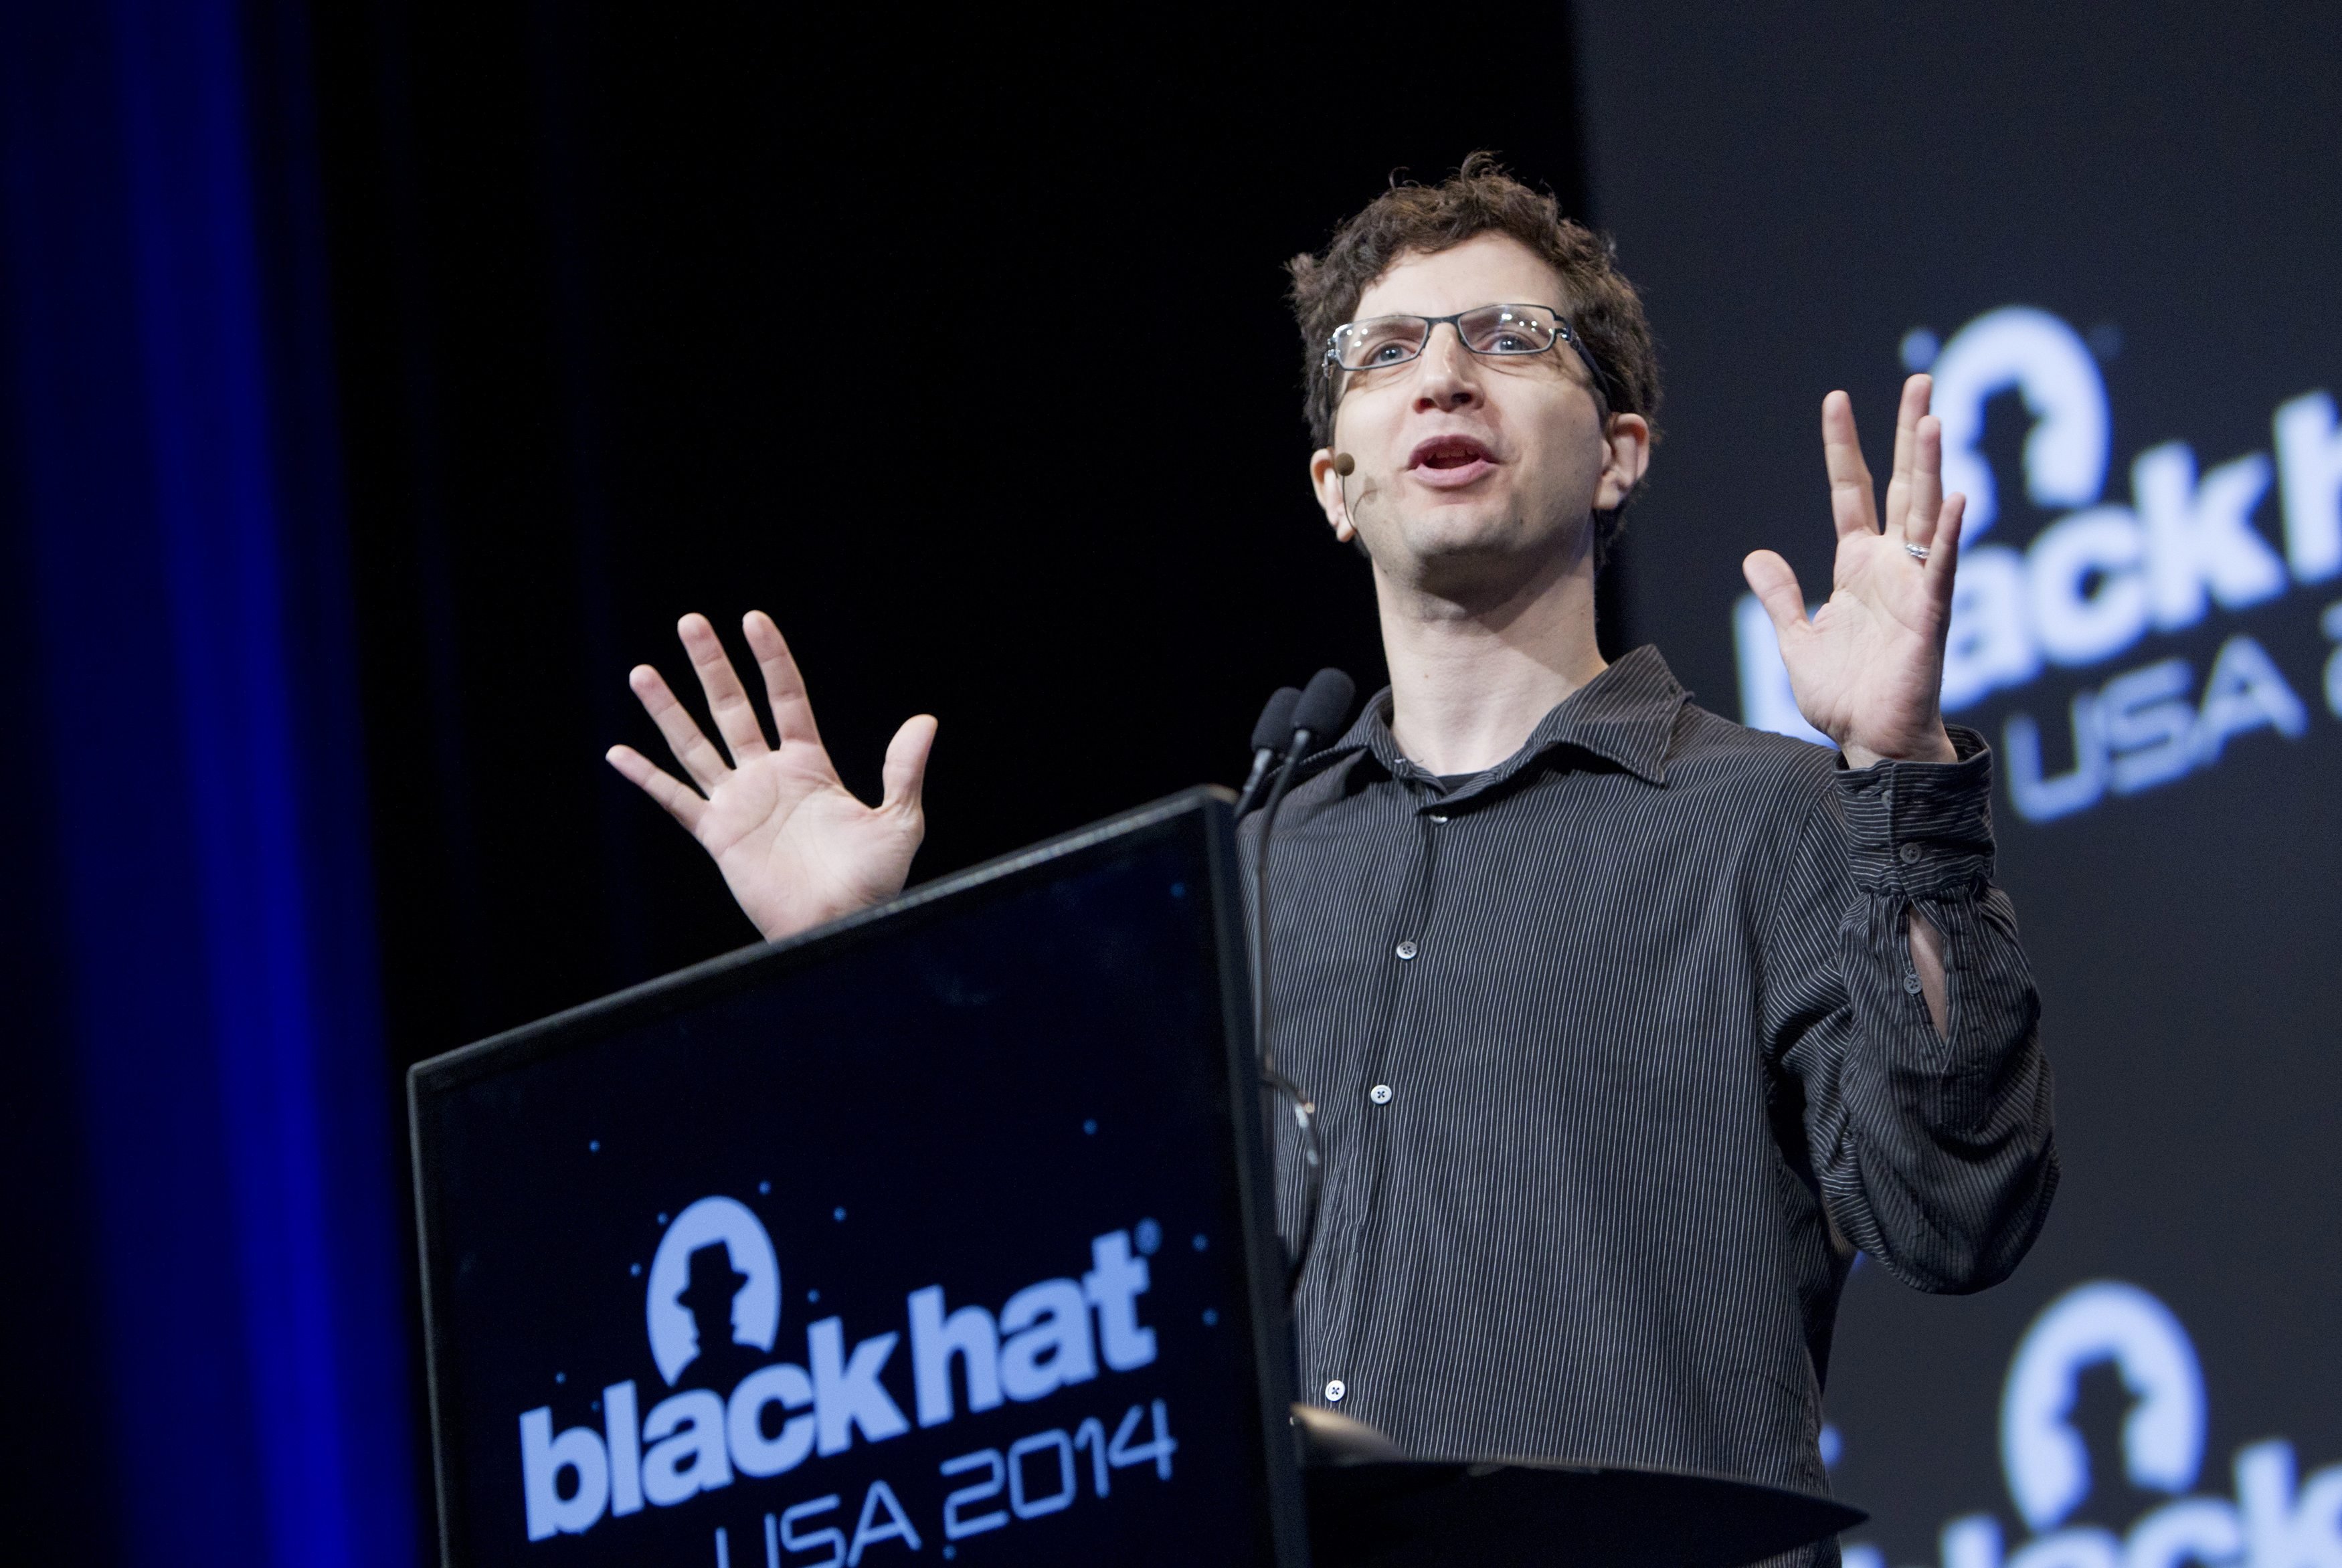 Hacker Jeff Moss also known as The Dark Tangent speaks during the Black Hat USA 2014 hacker conference at the Mandalay Bay Convention Center in Las Vegas, August 6, 2014. (Steve Marcus—Reuters)